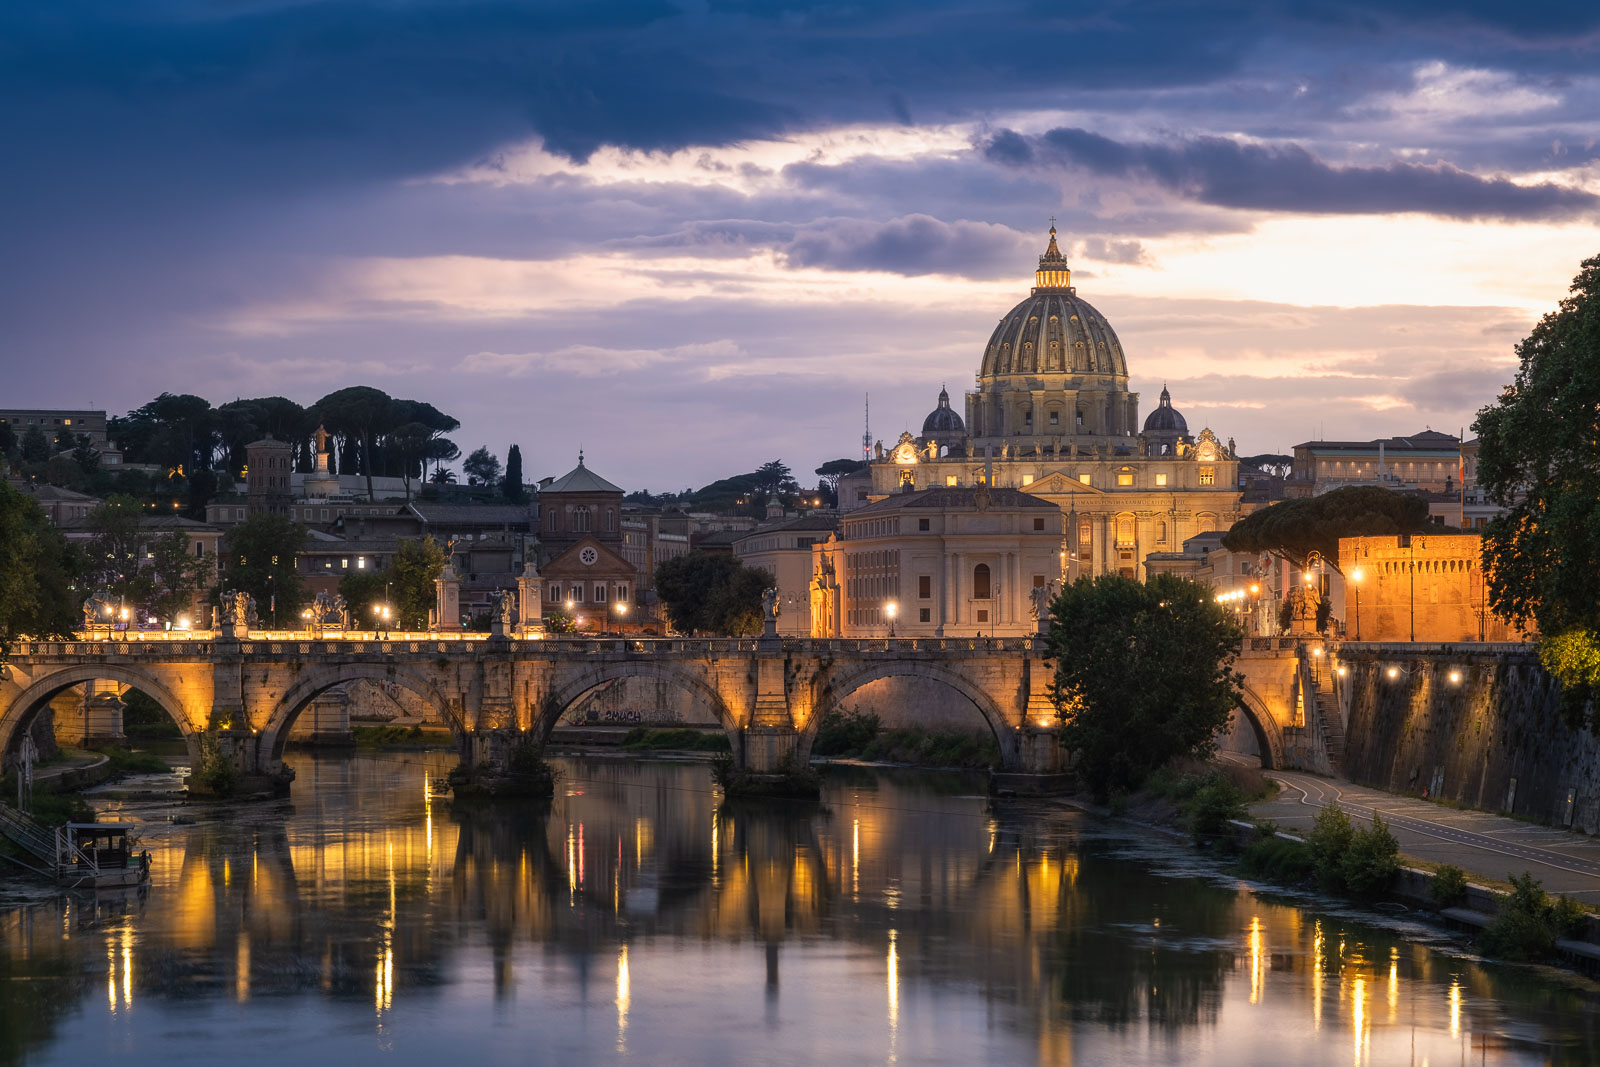 View of the Vatican City at sunset. The main building, St. Peters Basilica stands illuminated across theTiber River